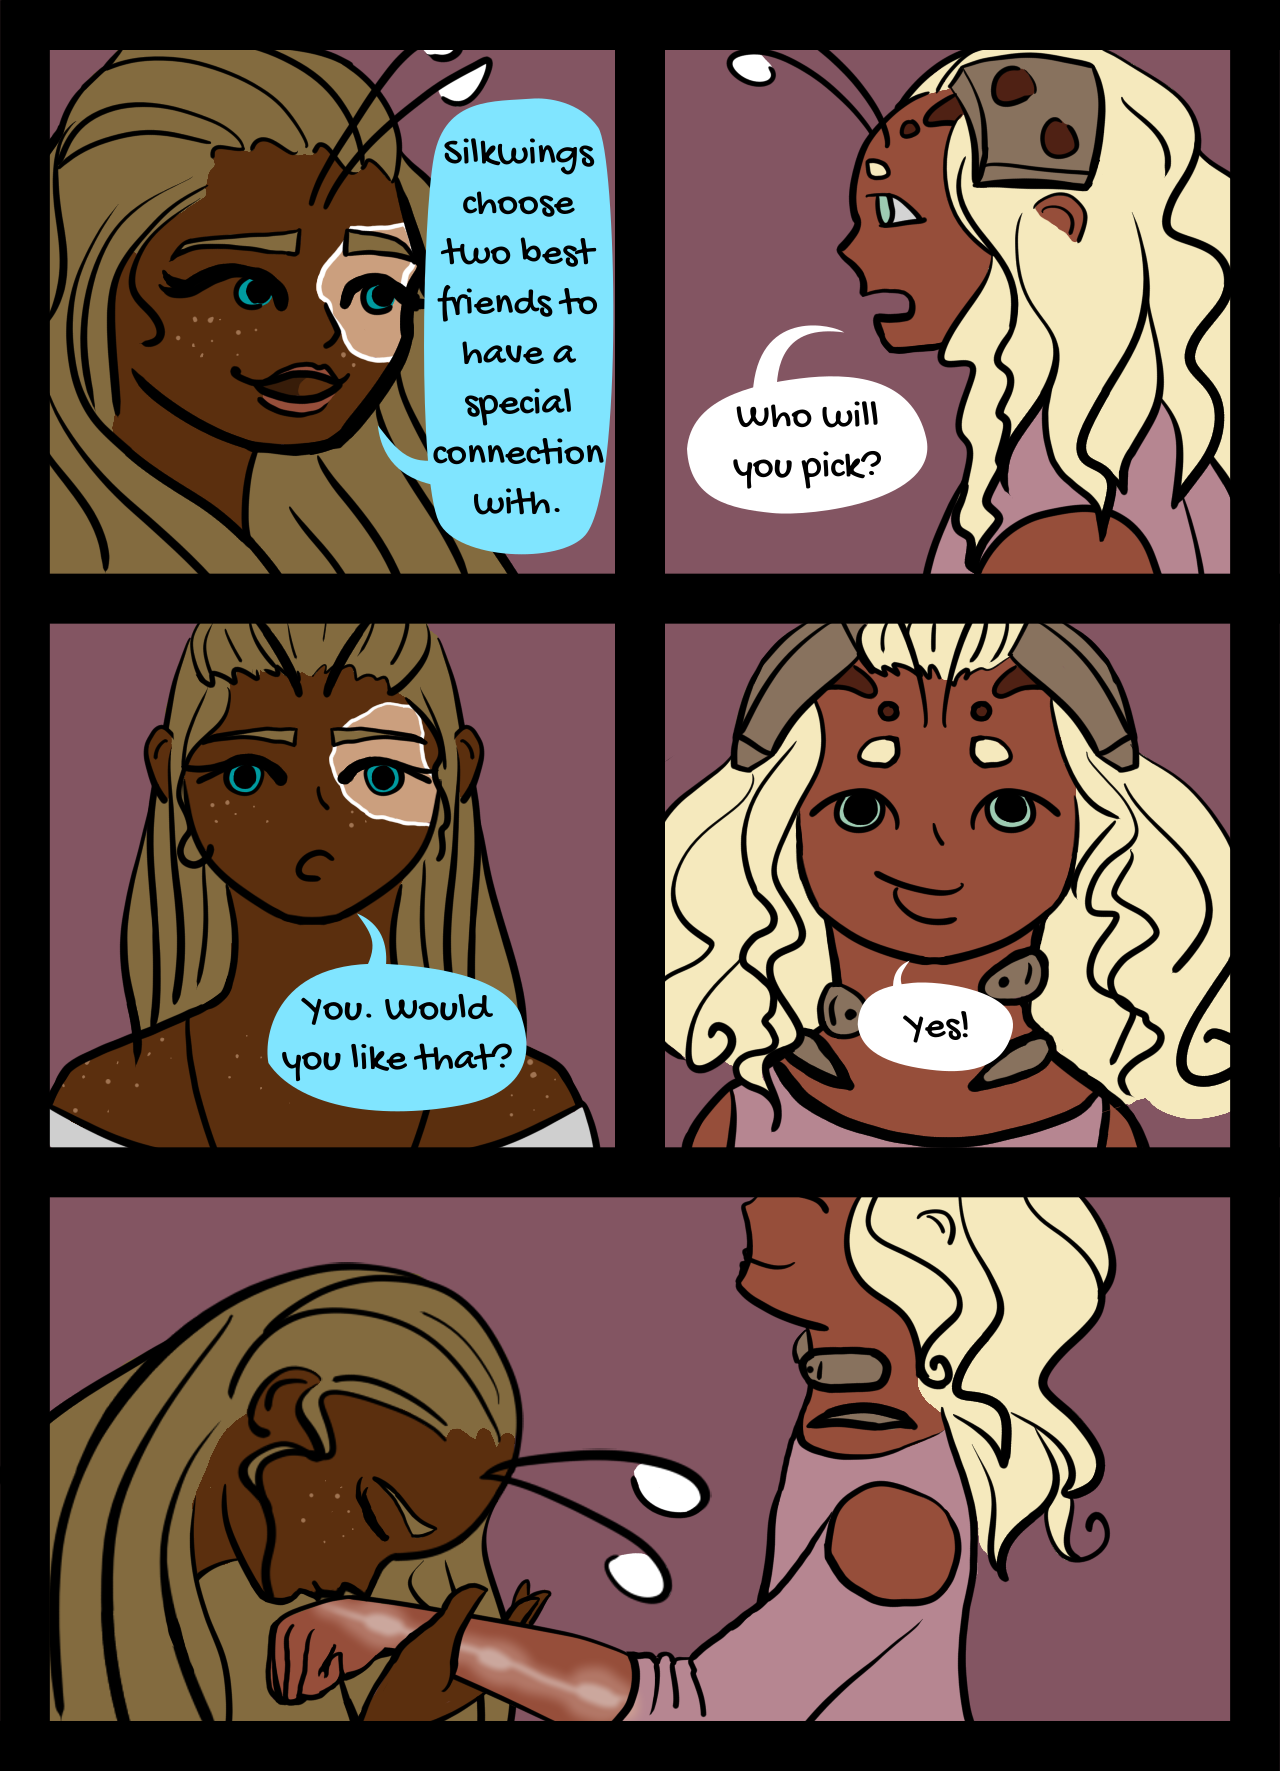 Page 42: A young woman, with fairy-like wings and shoulder-length hair, asks her sister, Sallina, if she wants to be one of her two special friends. Sallina agrees, so the woman kisses Sallina’s wrist to create her connection as a silkwing.